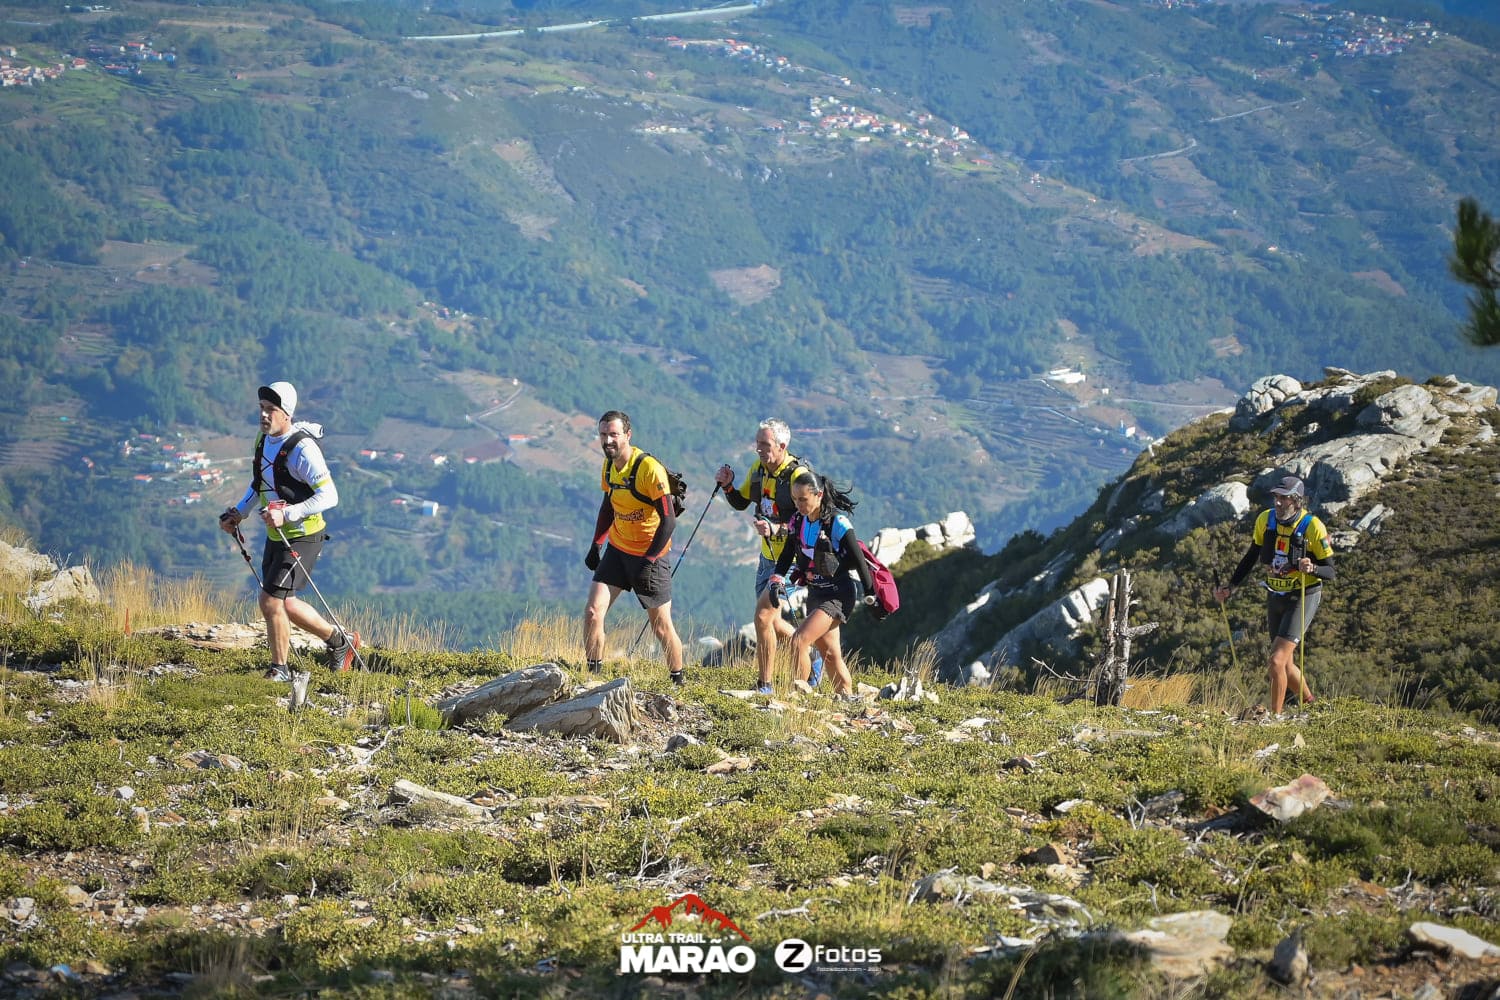 Trail runners competing at Marao Ultra trail